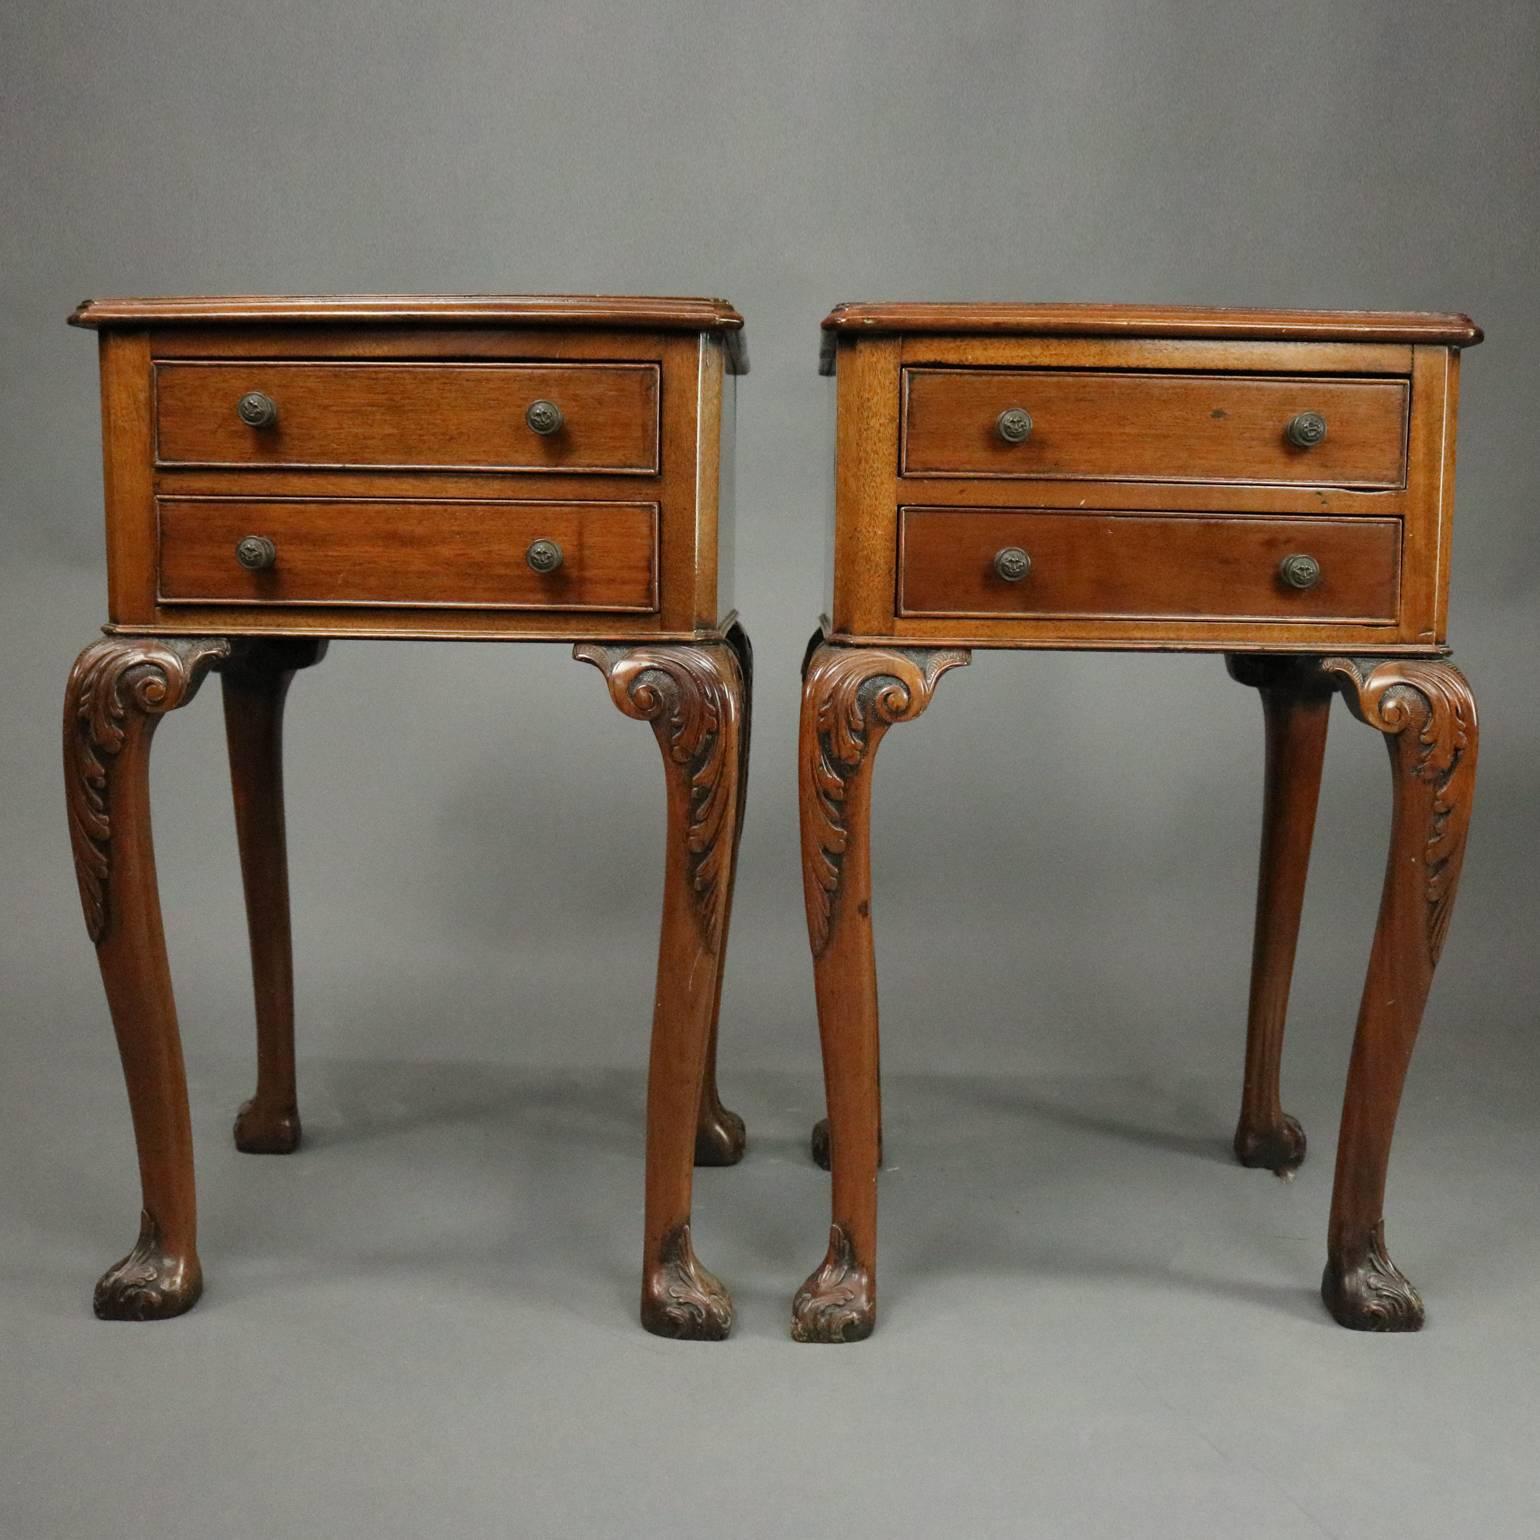 Pair of antique English Regency two-drawer end tables feature mahogany construction with two-drawers, cabriole legs with carved acanthus knees and feet, cast bronze lion head hardware, circa 1820.

Measure: 25" H x 15" W x 14" D.